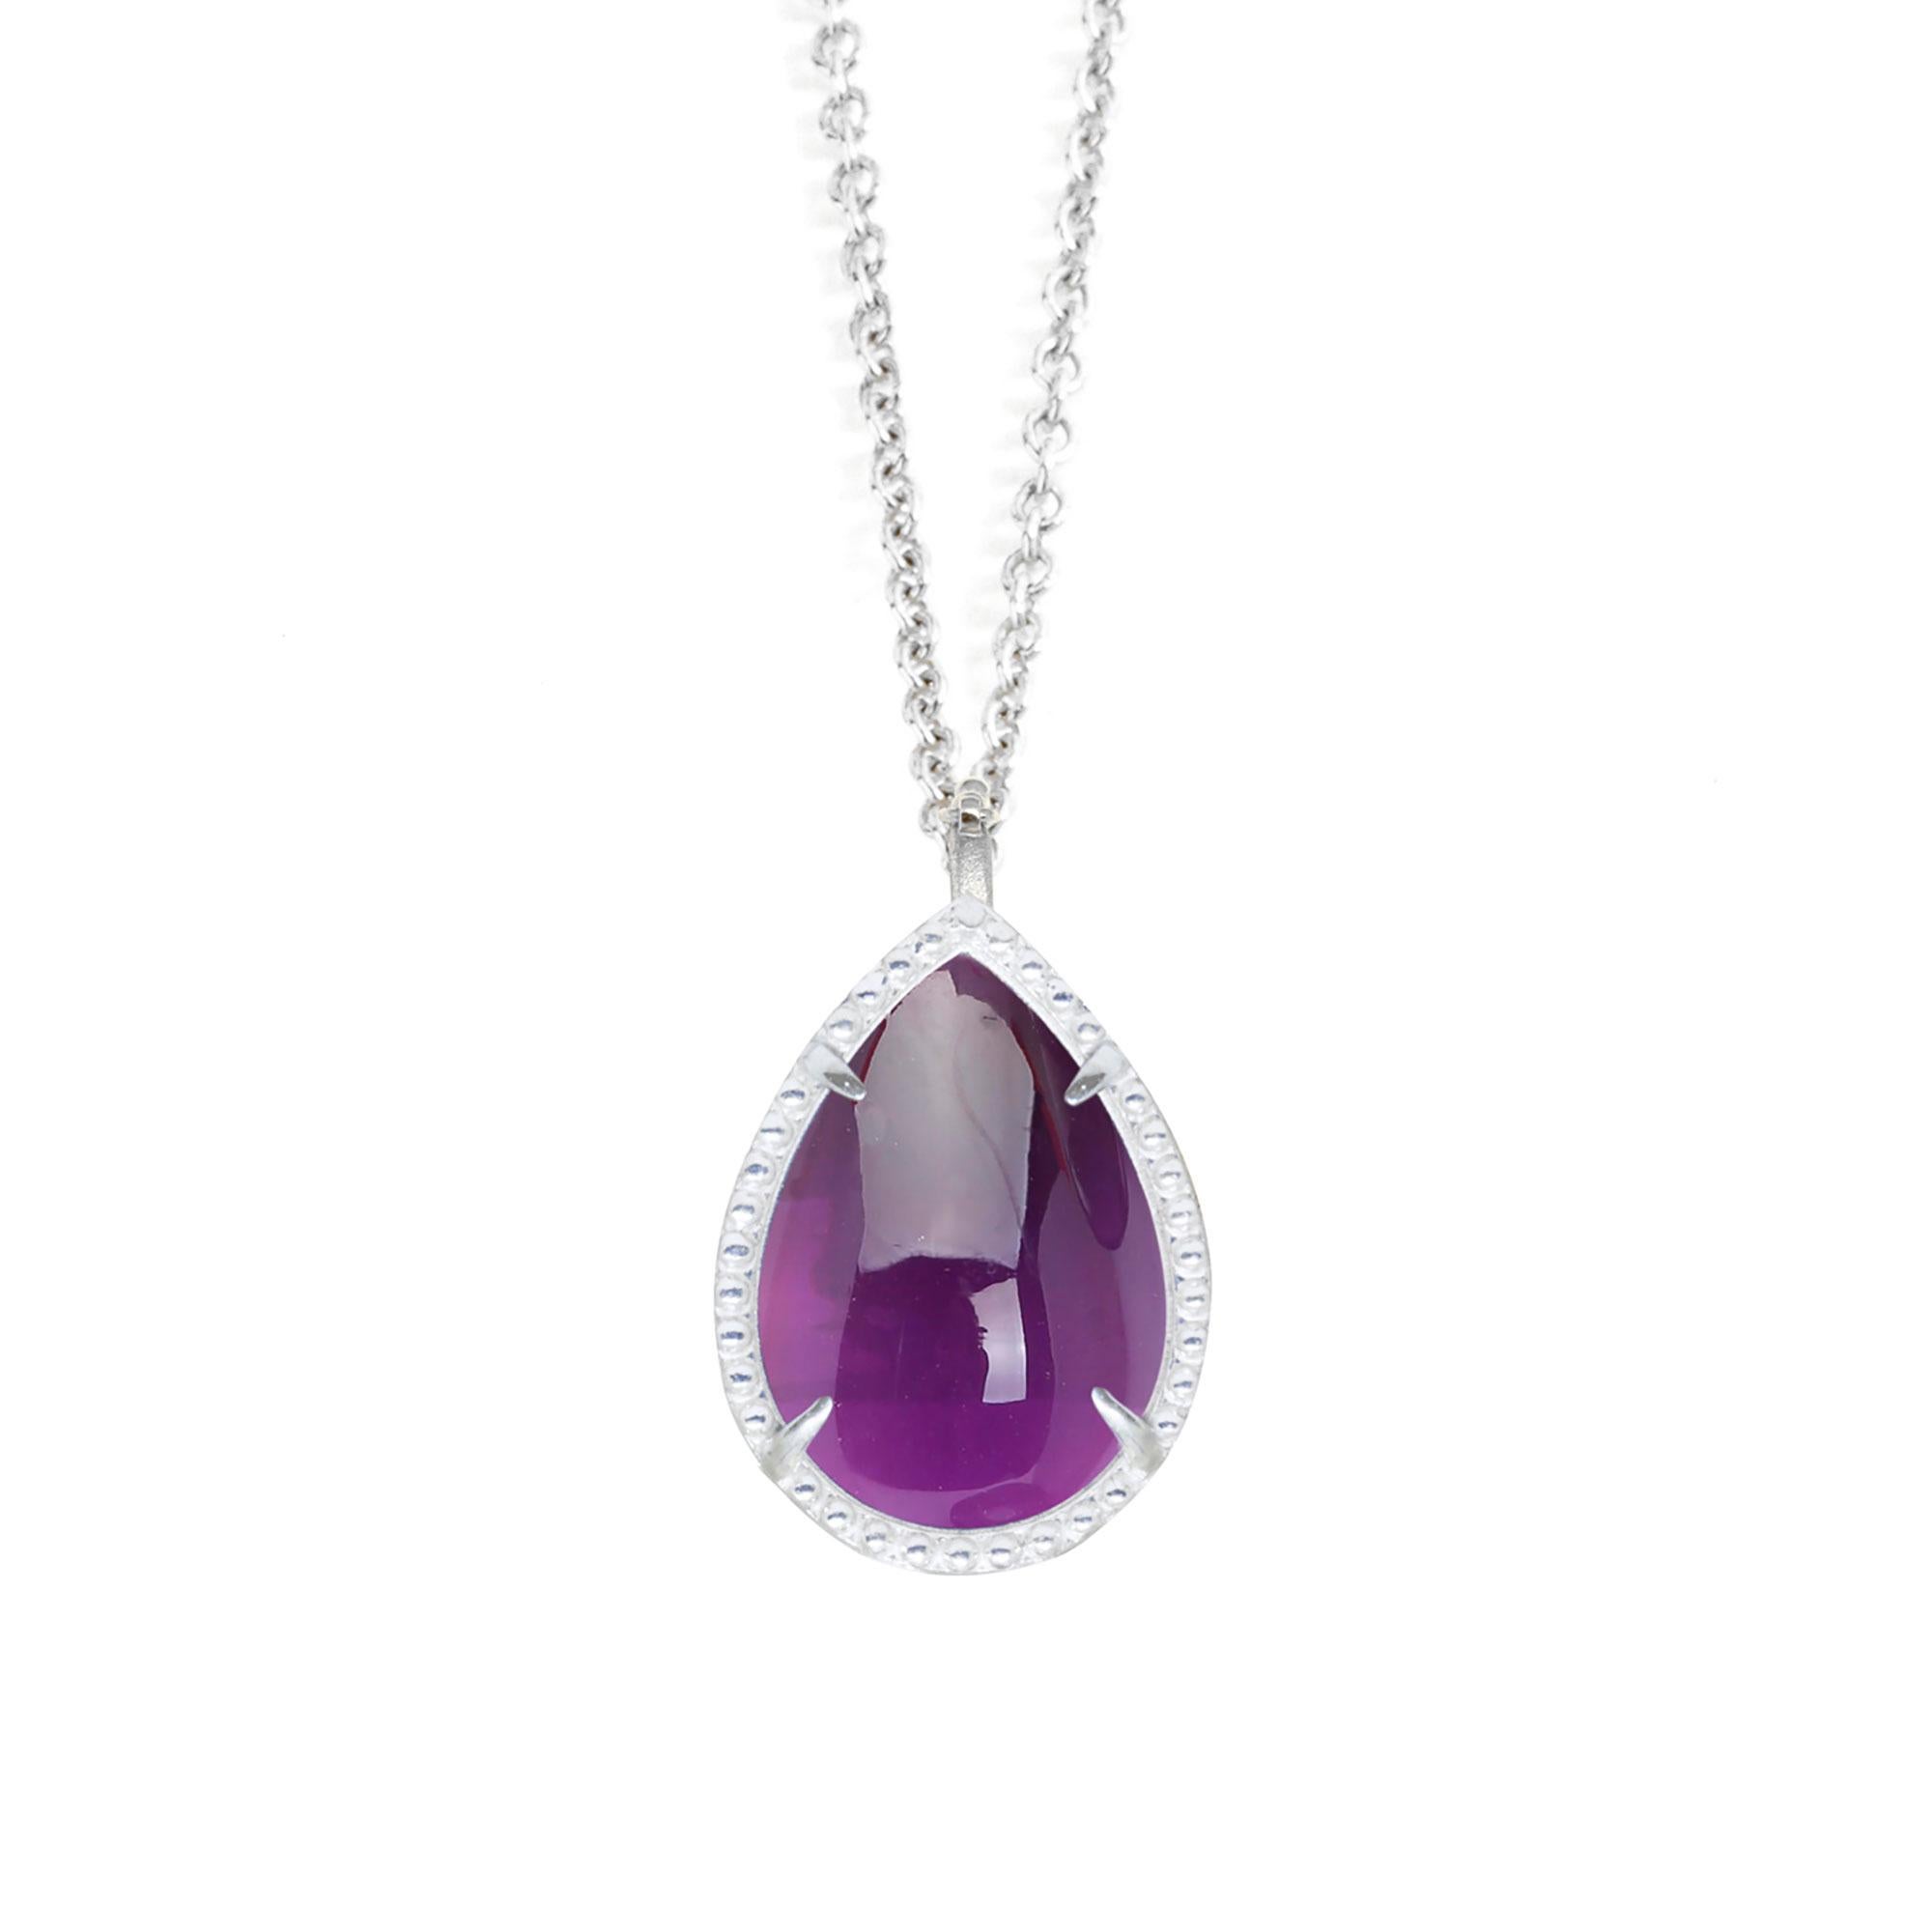 Details
Metal: Sterling Silver
Stone carat: 3
Length: 15-17''
Stone size: 10x7mm

About the stones:
Genuine Amethyst: The violet-hued variety of the mineral quartz is also February’s birthstone.

Metaphysical Properties: A stone that brings a sense